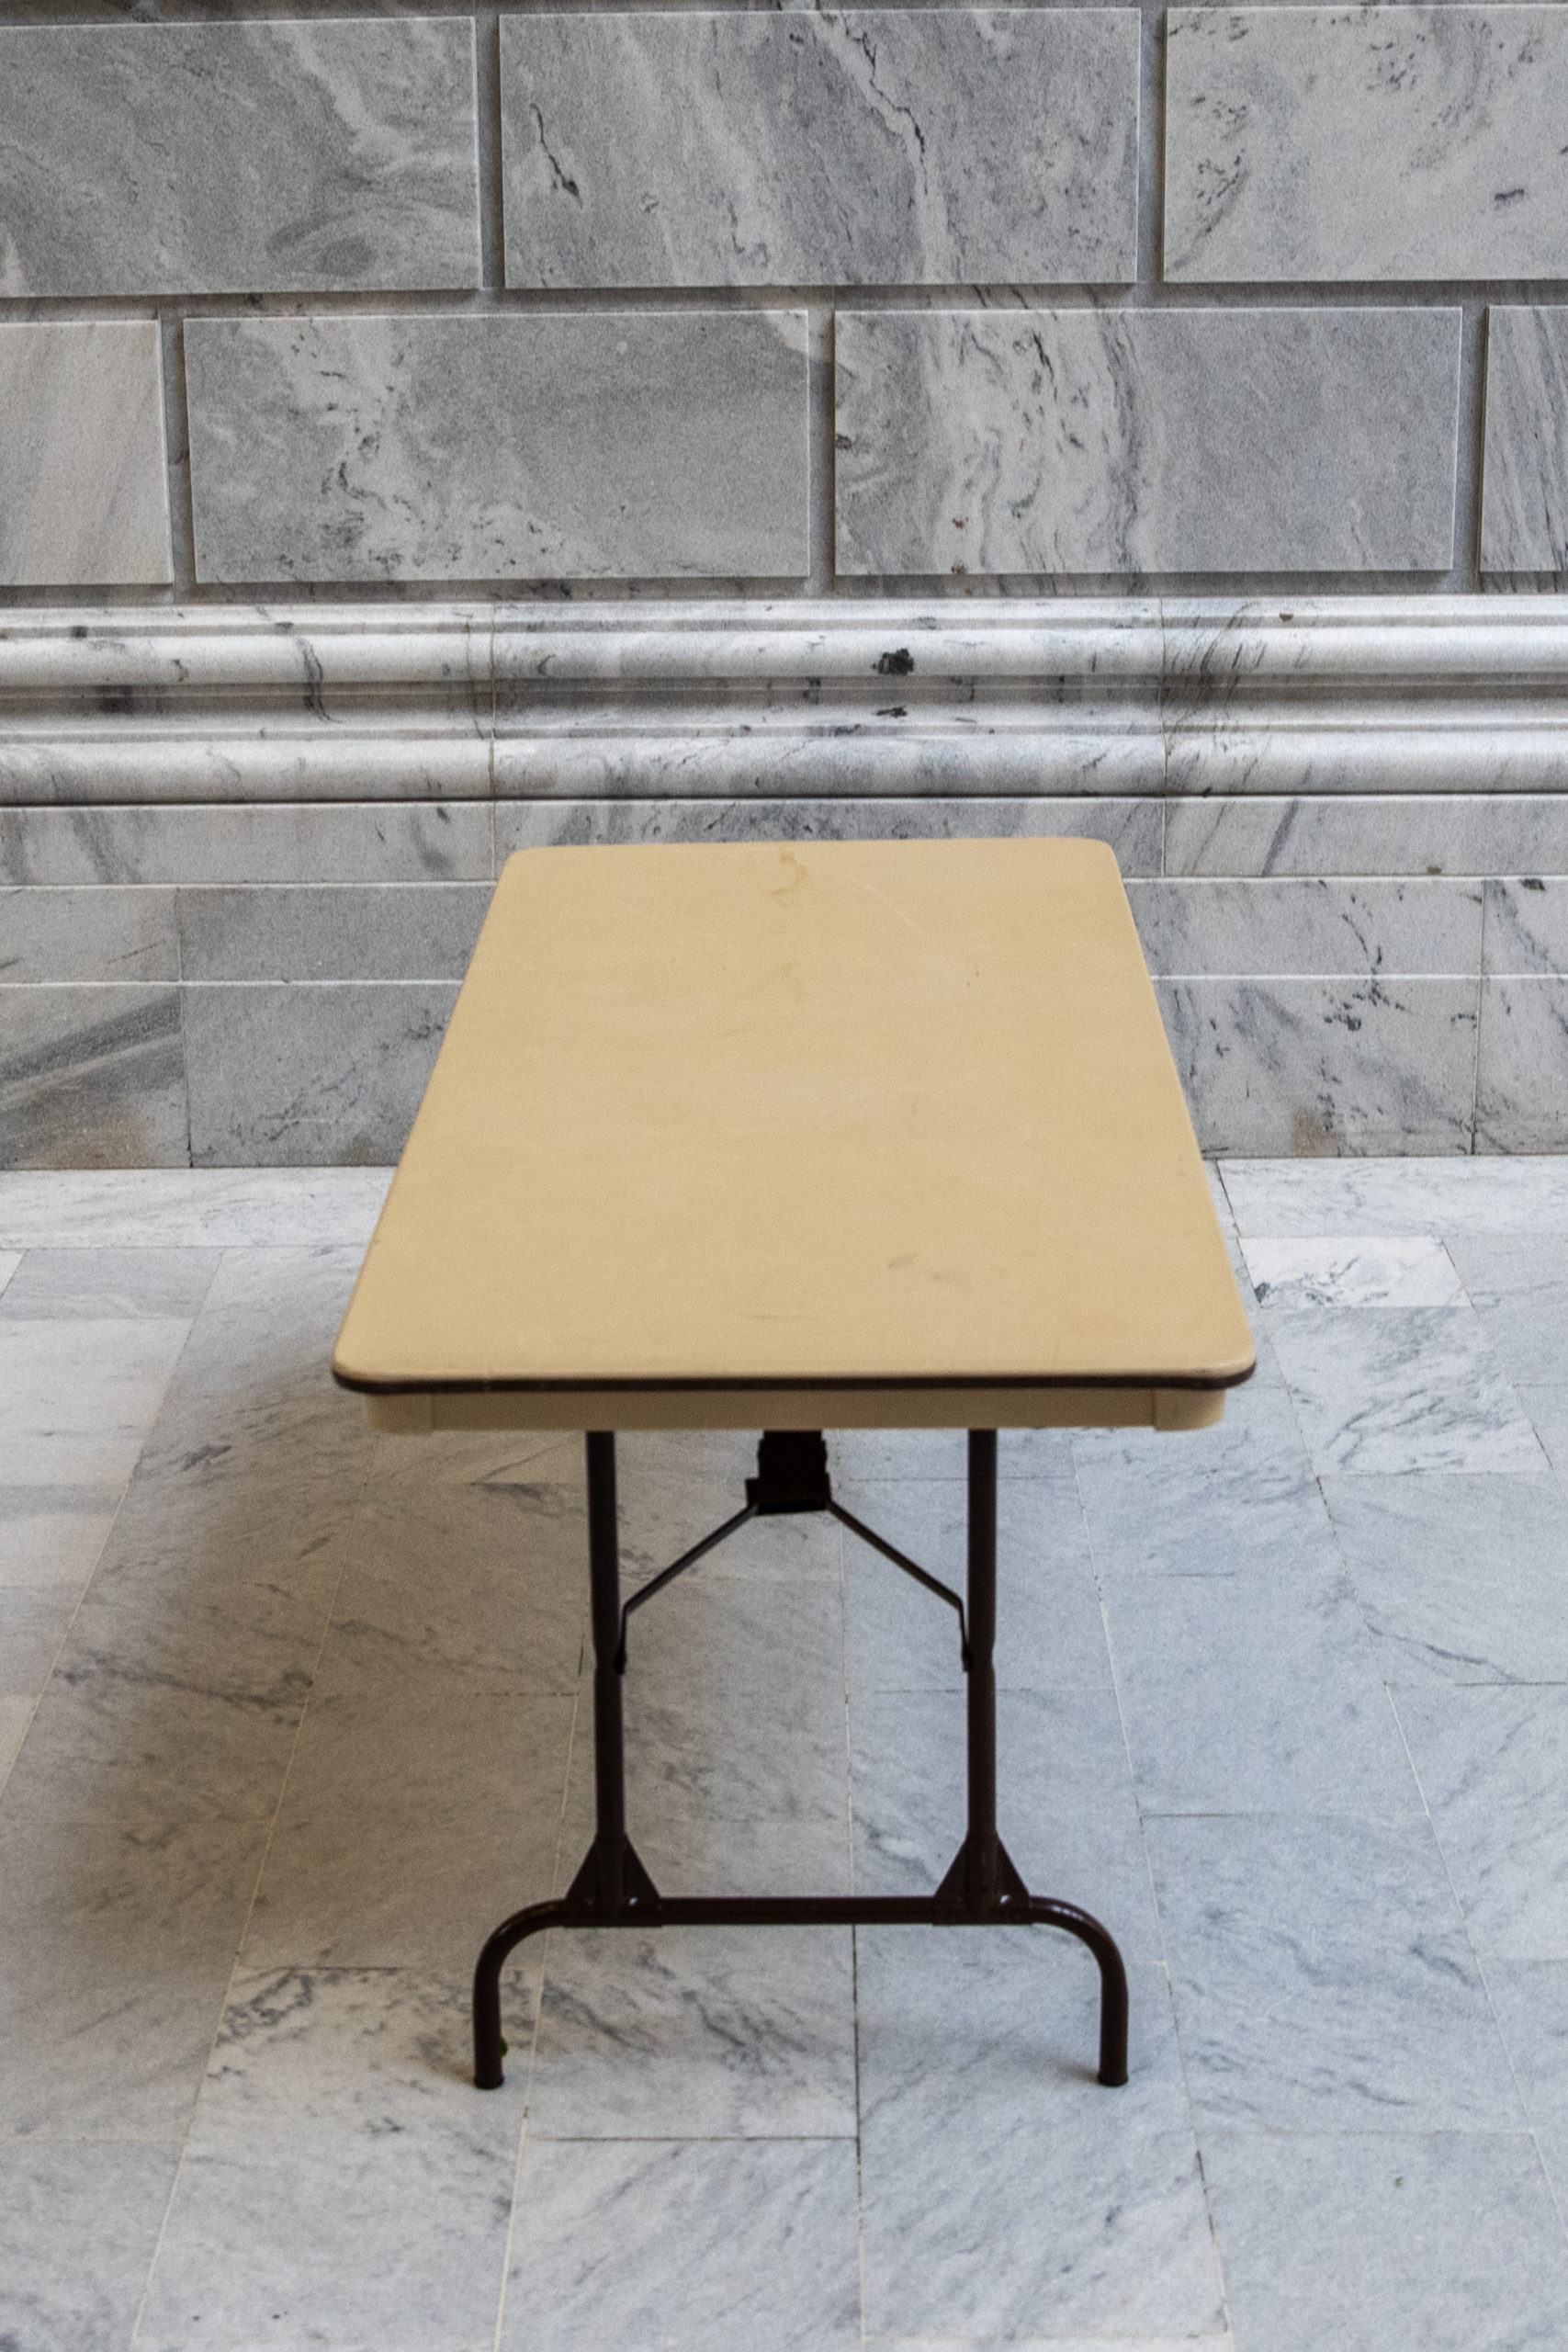 6' Rectangular Banquet Table on marble backdrop